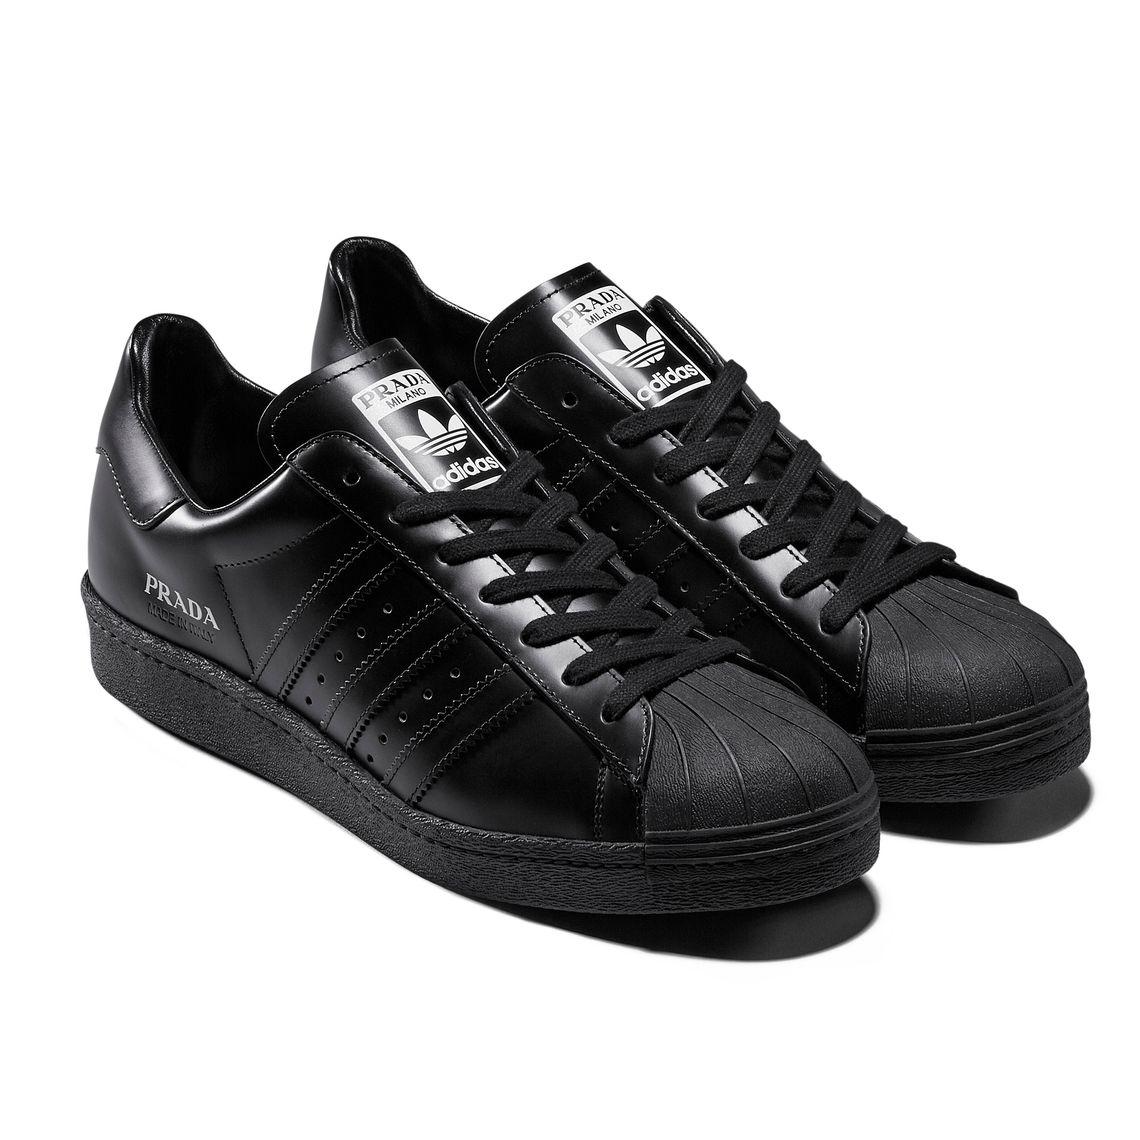 Low-top buffed leather sneakers in black. Round rubber cap toe. Tonal lace-up closure. Logo printed in white at padded tongue. Padded collar. Perforated detailing and signature serrated stripes at sides. Logo printed in white at outer side. Logo